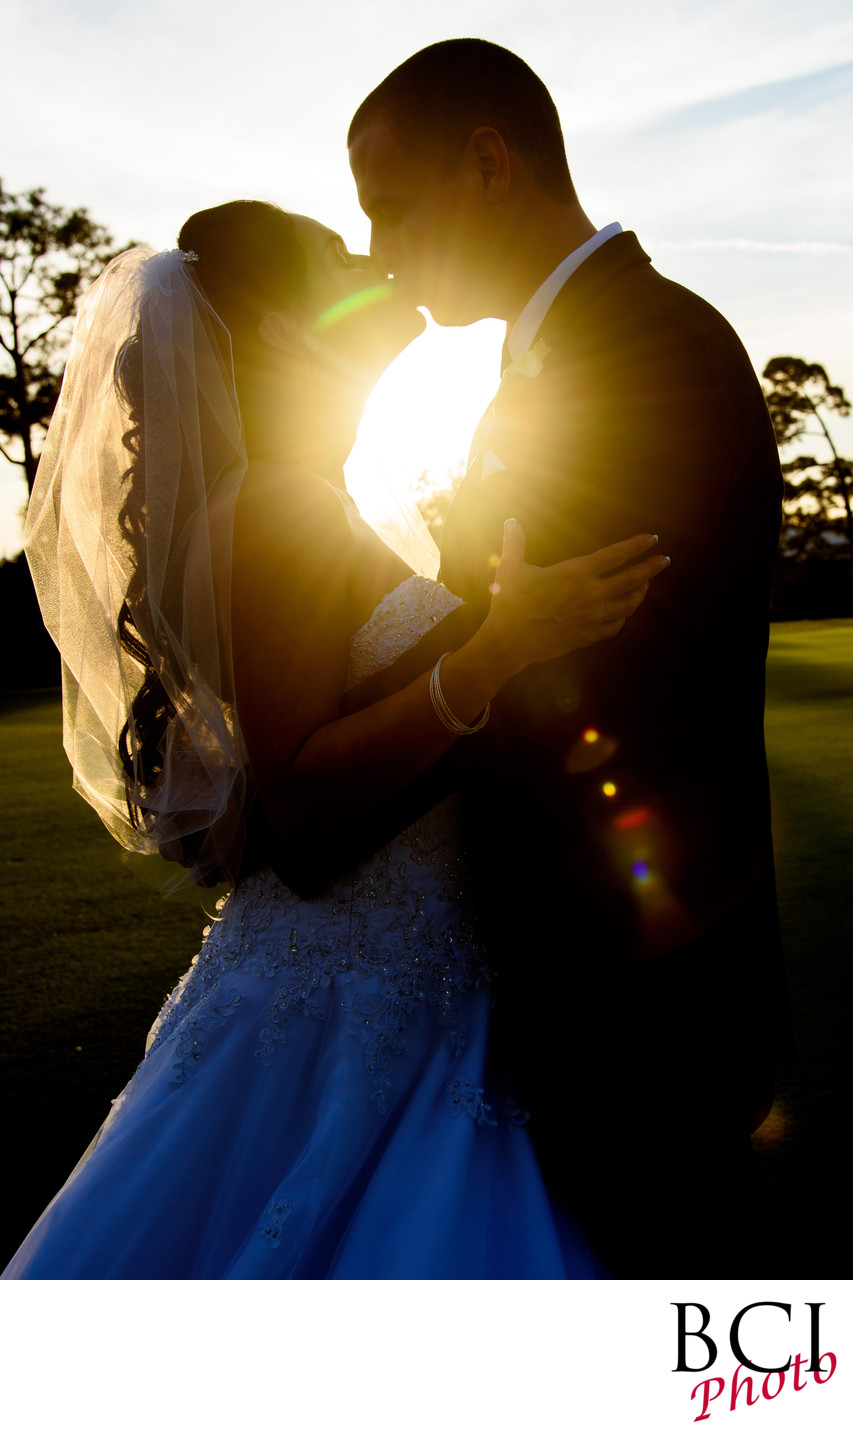 Great sunset wedding pictures from local weddings